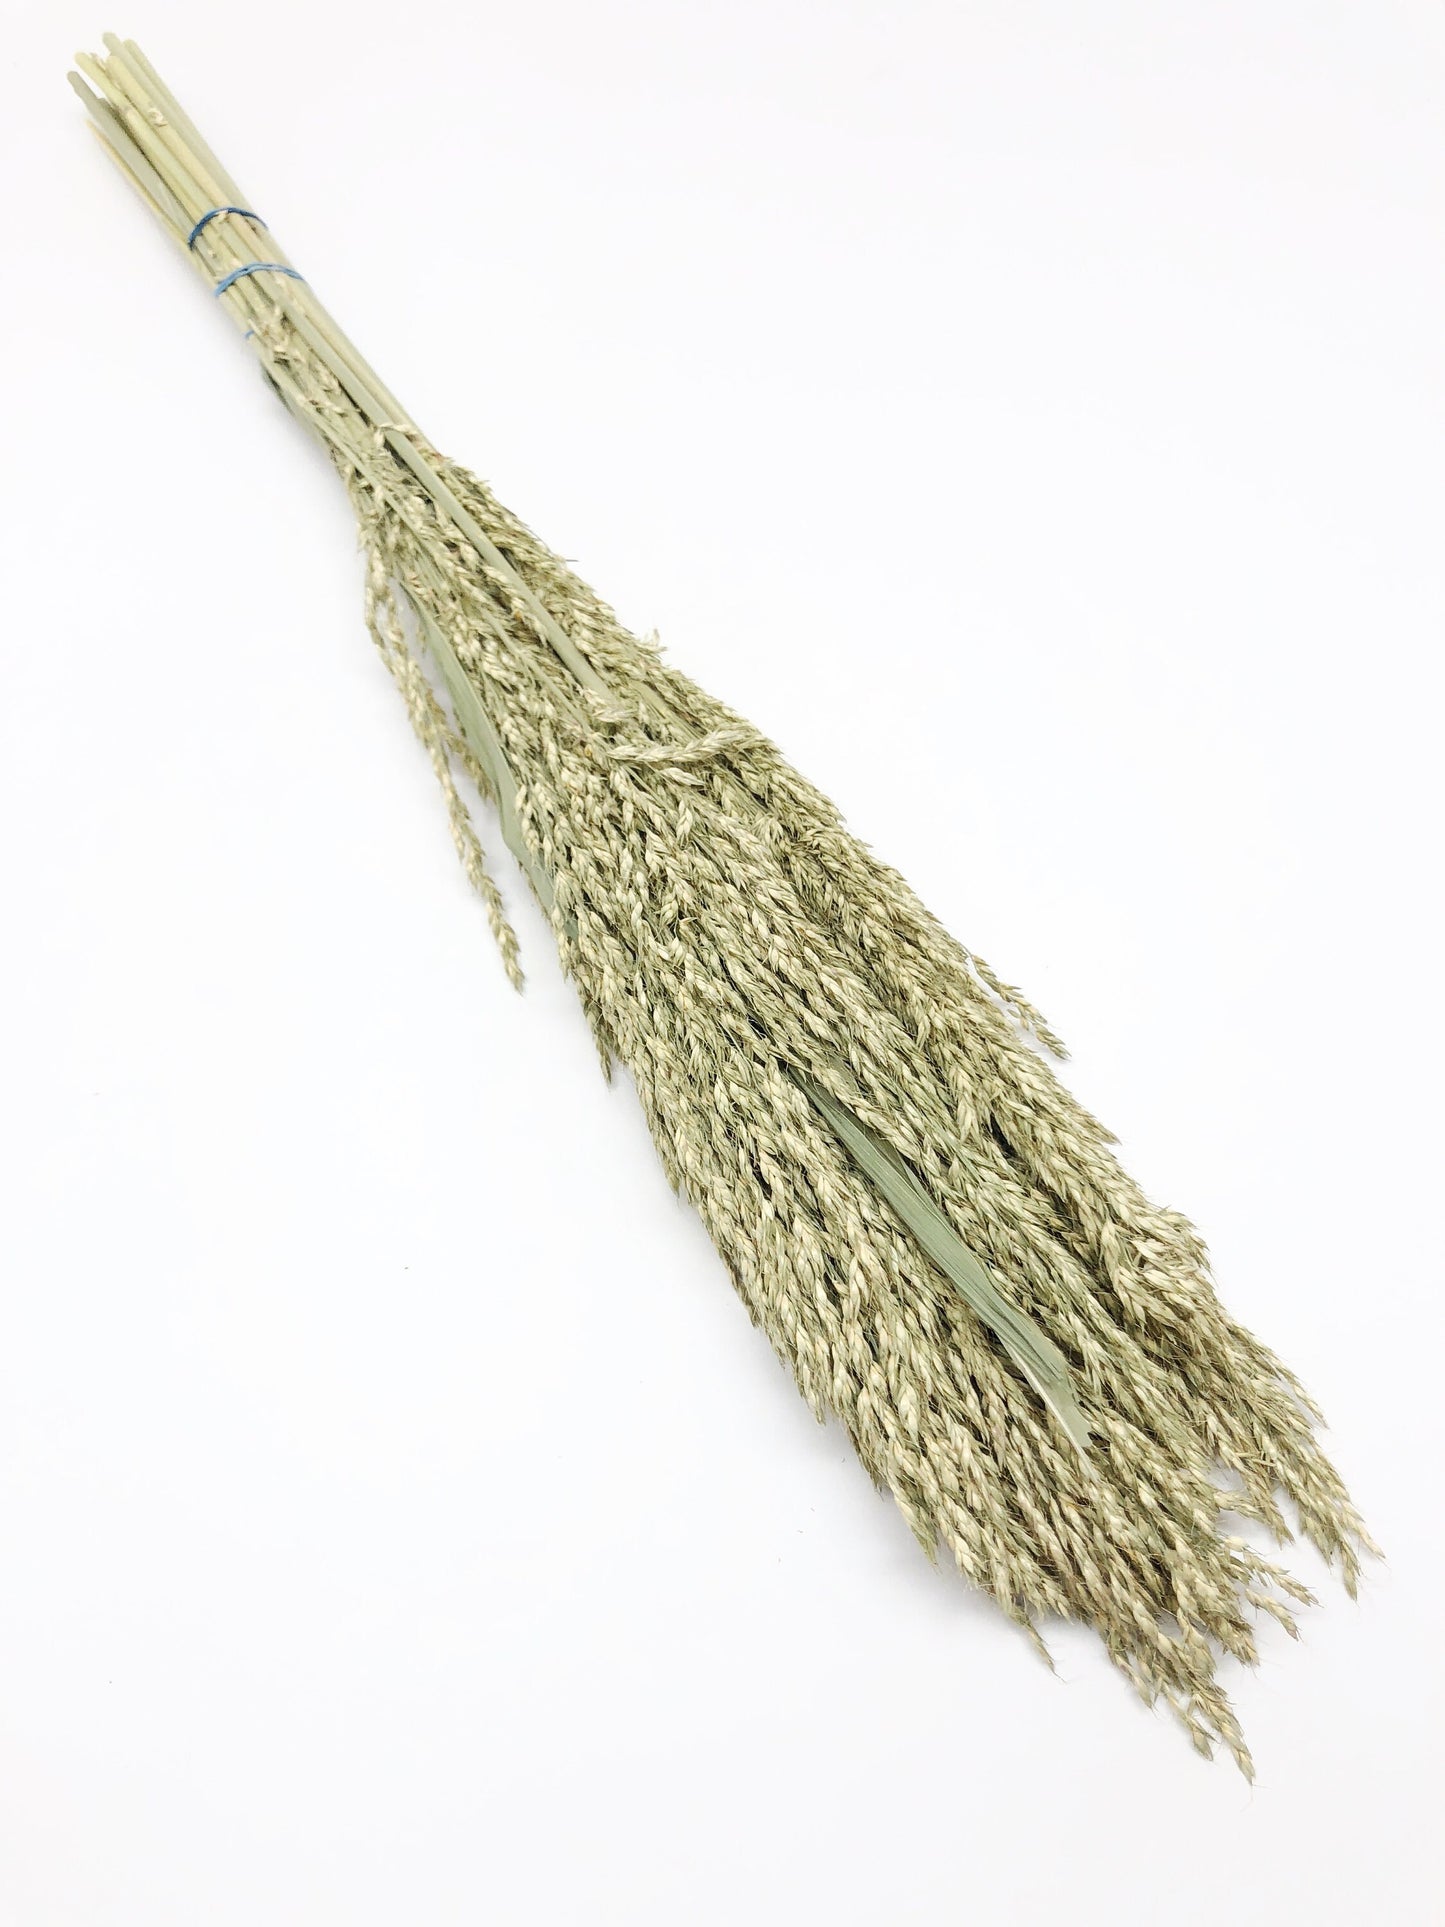 Sudan Grass, Preserved Grass, Preserved Flowers, Wedding Flowers, Filler, Floral Arrangement, Dried Wheat, Green, Country, Wheats and Grass